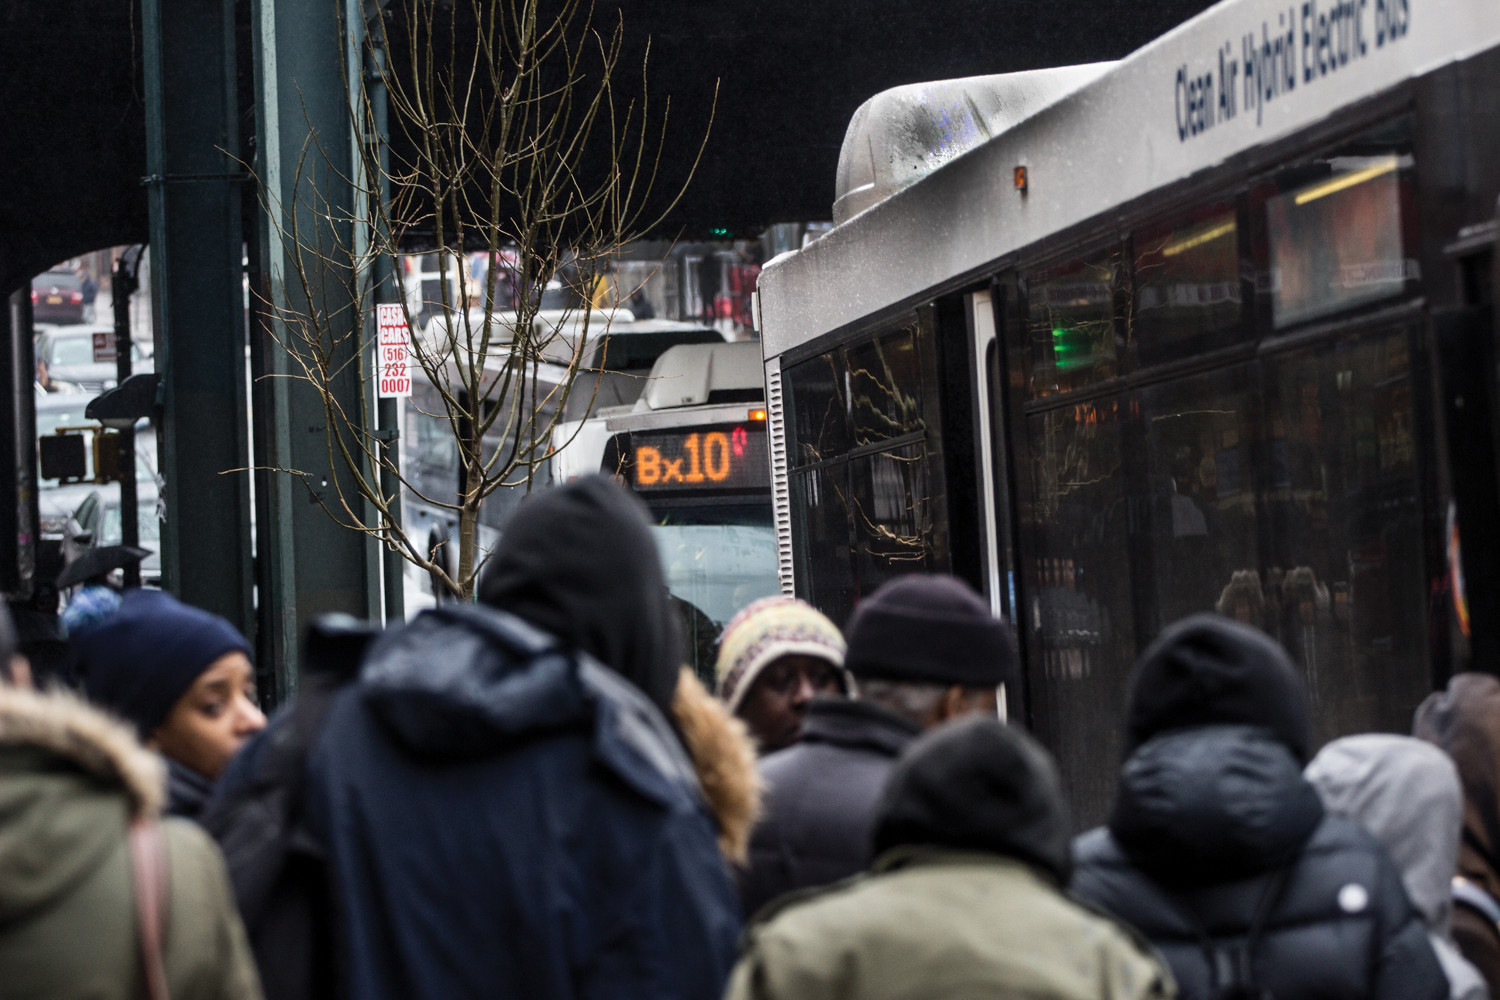 Riders press together to get onto a Bx7 bus as a Bx10 arrives at West 231st Street and Broadway last year. Gov. Andrew Cuomo’s Fix NYC advisory panel released a congestion pricing plan that would affect more than 5 percent of residents in Riverdale and Kingsbridge.